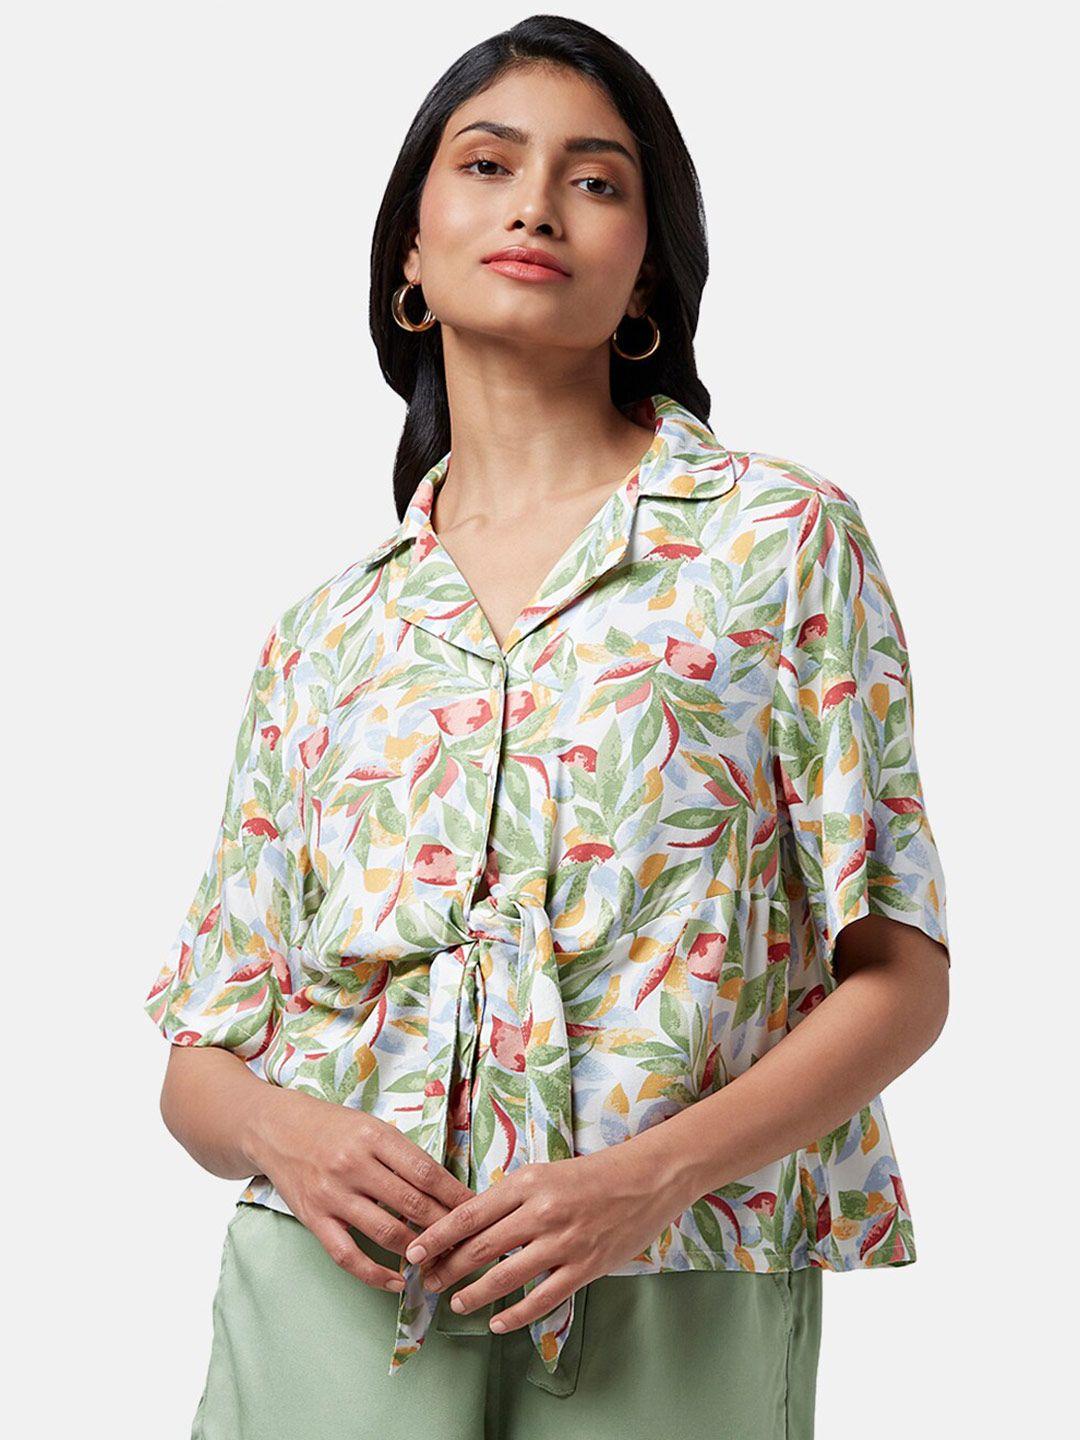 honey by pantaloons waist tie-up detail floral printed shirt style top